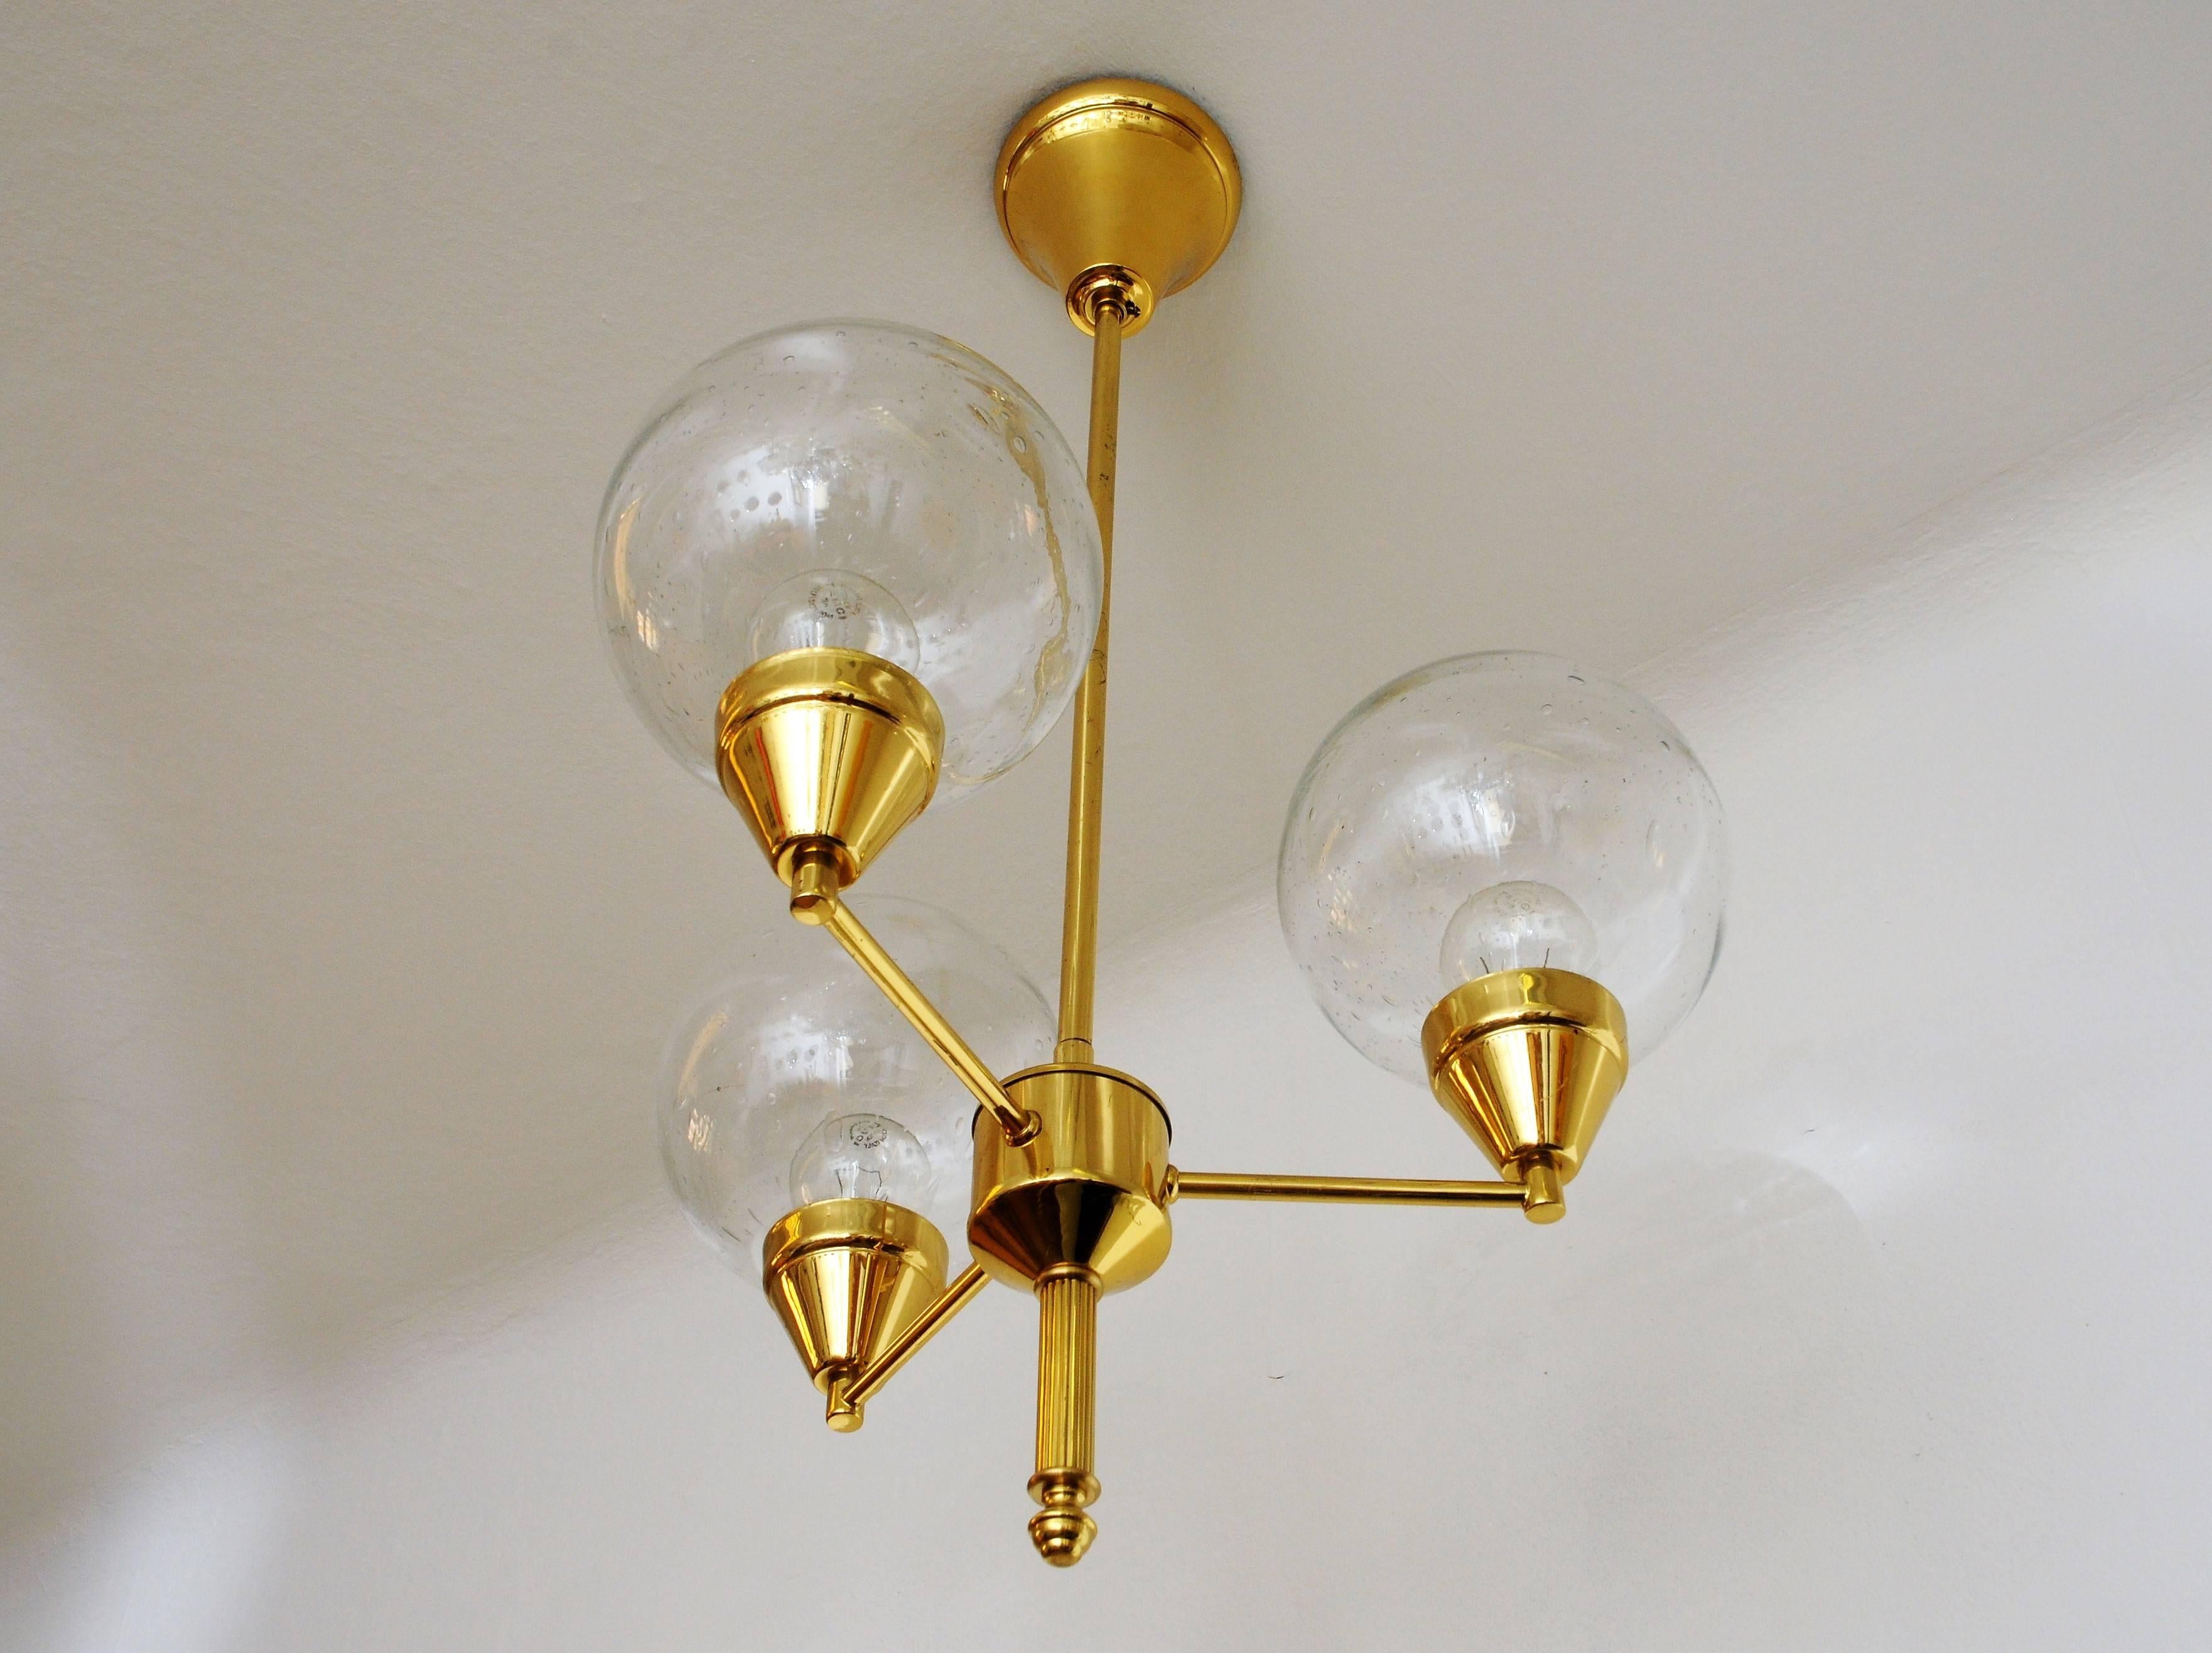 Scandinavian Modern Midcentury Brass Ceiling Lamp with Three Clear Glass Domes 1960s, Sweden